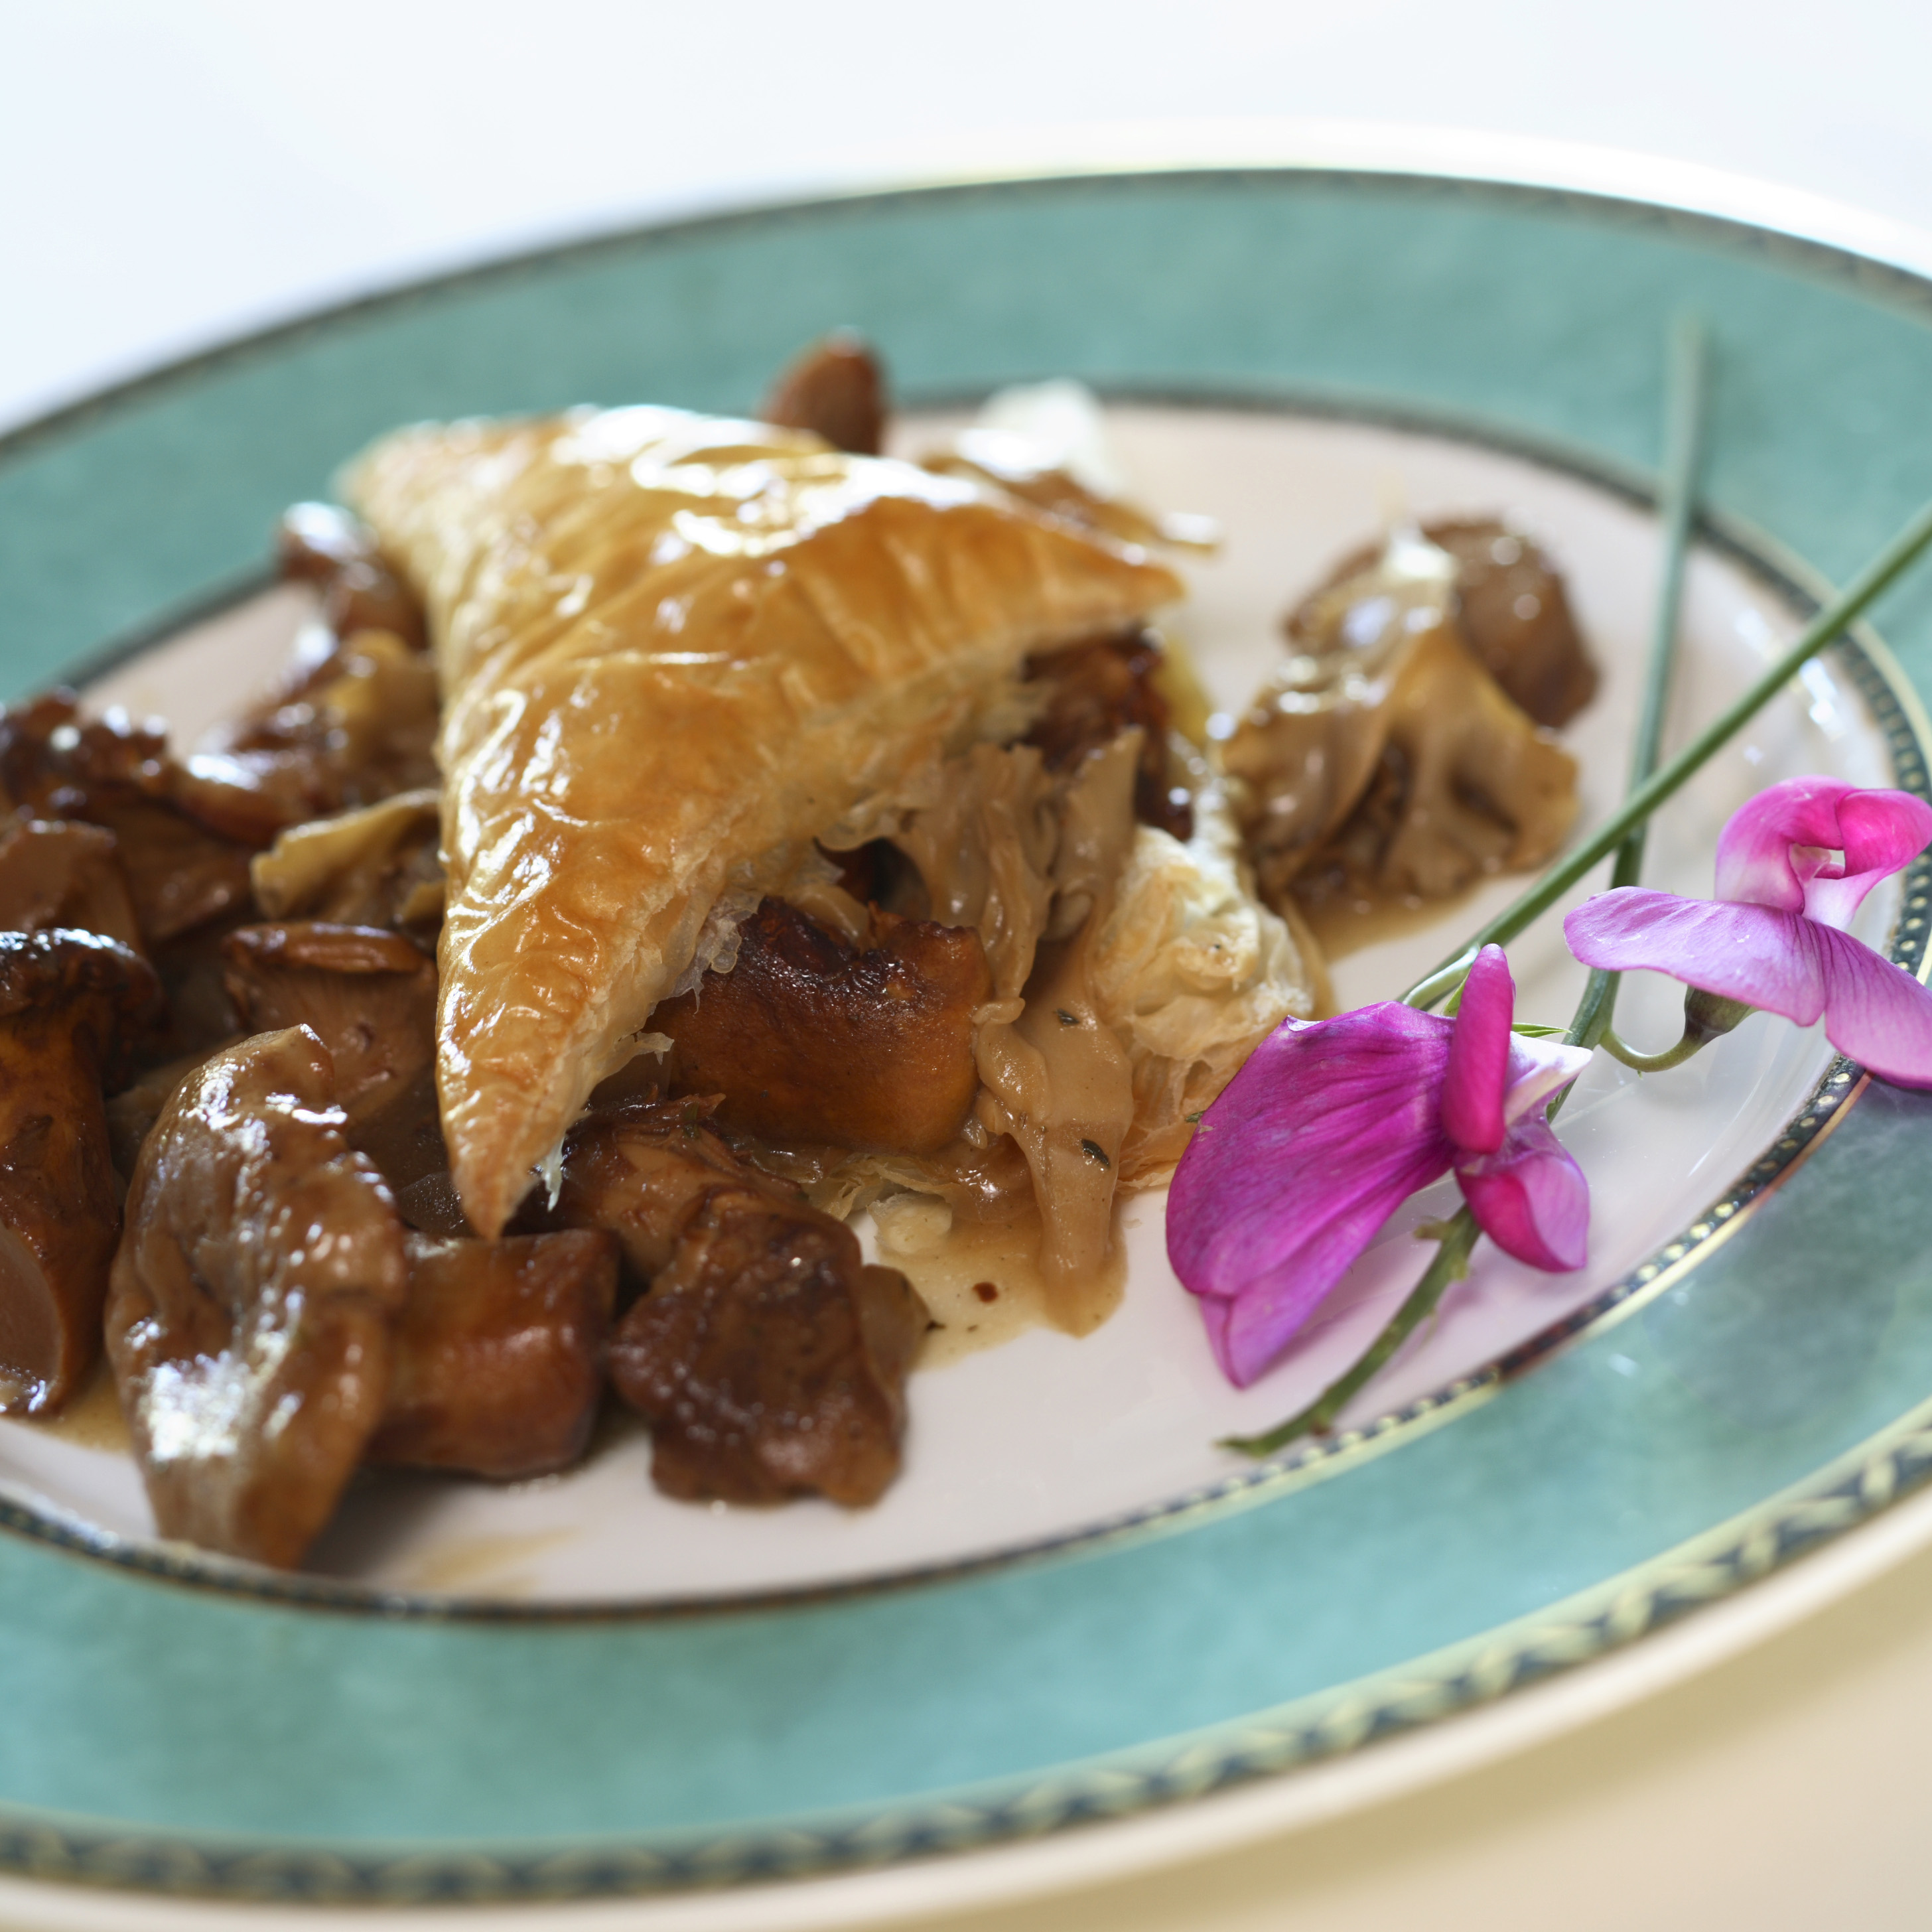 Wild Mushrooms and Puff Pastry